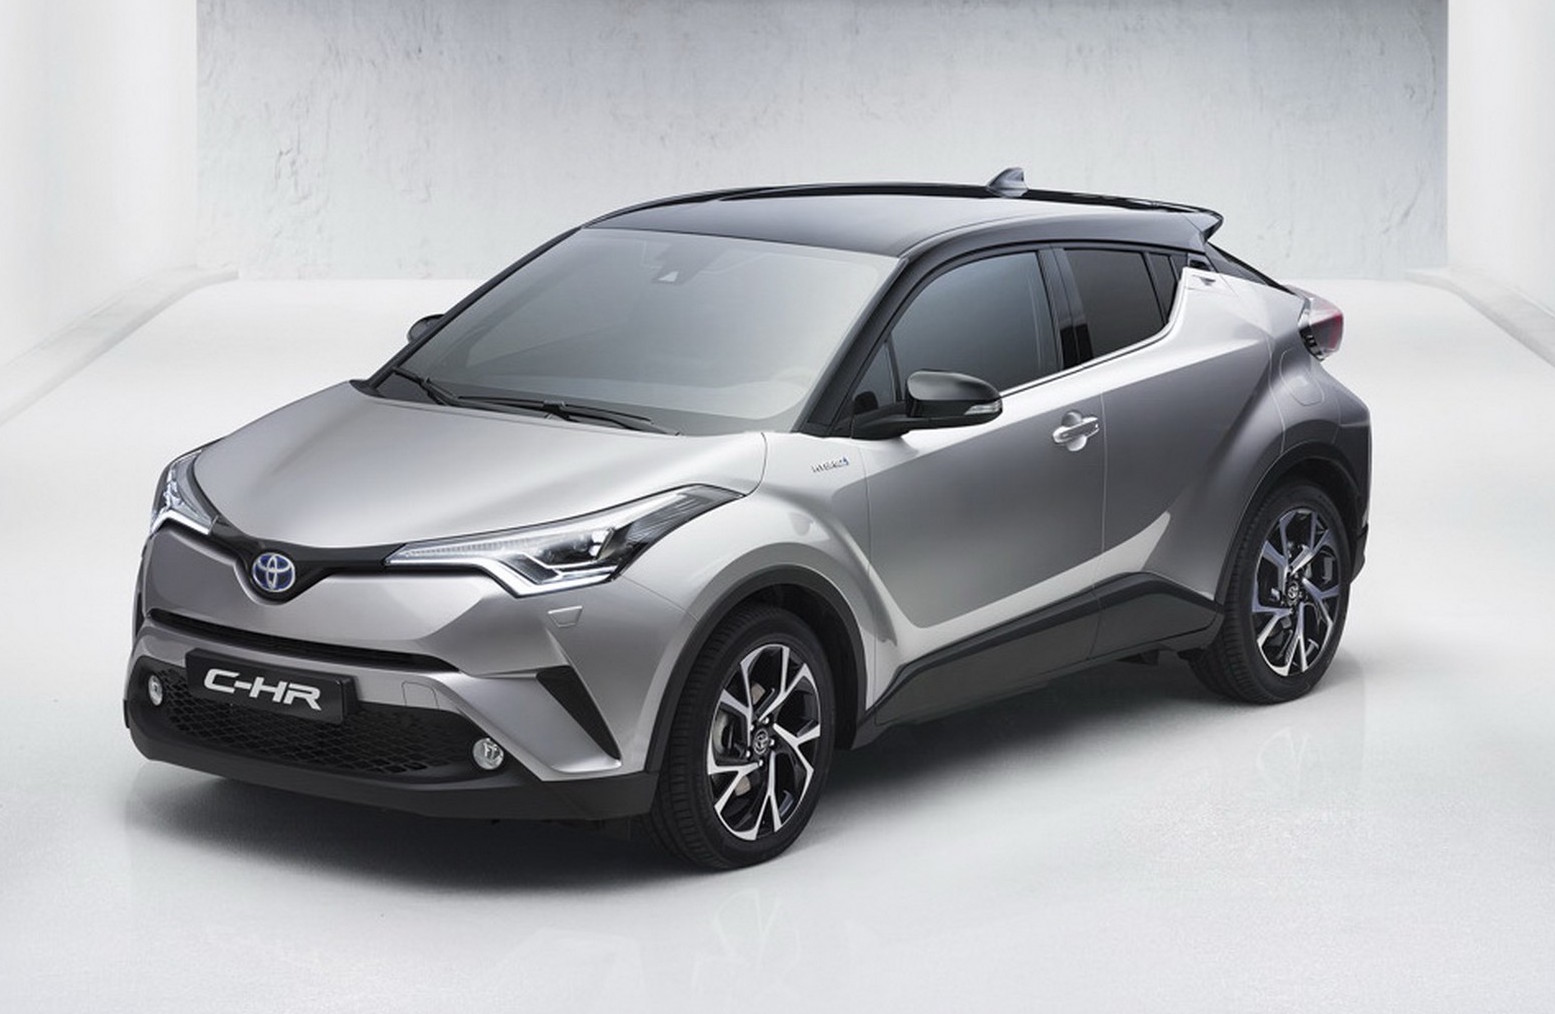 Toyota CHR production compact SUV leaks out early